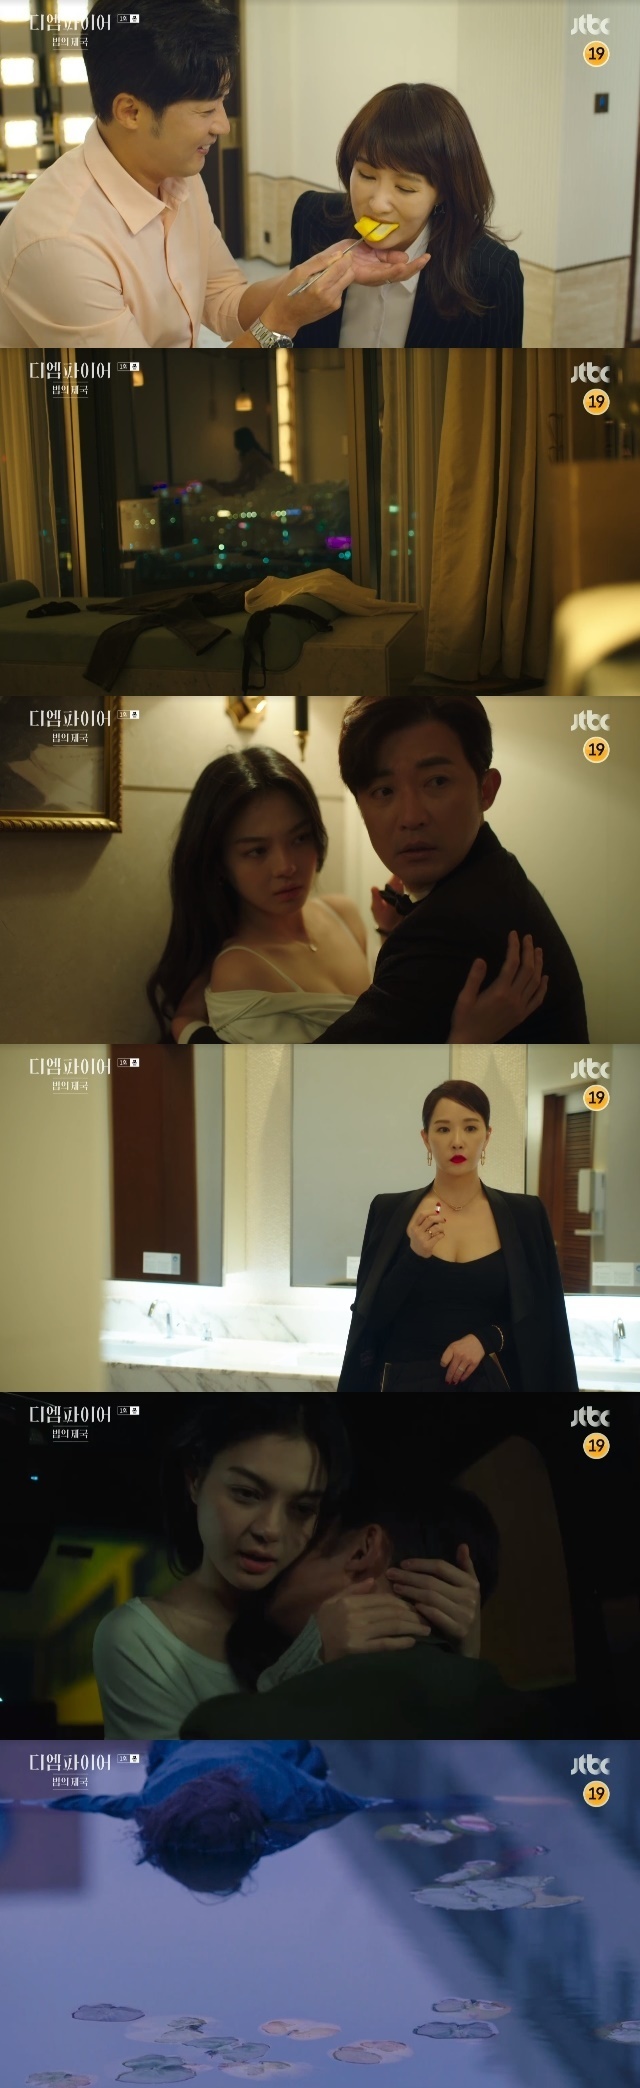 With Ahn Jae-wook committing Affair over Kim Sun-a, a body was found and added to the mystery of the drama.In the first JTBC Saturday drama The Empire of Law (playplayed by Ogagyu and directed by Yoo Hyun-ki), which was first broadcast on September 24 Days, the uneasy marital relationship between Han Hye-ryul (Kim Sun-a) and Na Geun-woo (Ahn Jae-wook) was drawn.The leading Royal Prerogative candidate, Na Geun-woo (Ahn Jae-wook), and Han Hye-ryul (Kim Sun-a), the head of the Seoul Central District Prosecutors Office, were seemingly perfect couples.Na Geun-woo was a respected law school professor outside, and a friendly husband who cooked dinner for his wife inside. This was exposed and displayed in front of people and cameras.But Na was living a double life. He enjoyed Secret Affair with a woman on the night of directing Han Hye-ryul and a couple.Na Geun-woo refused to say, Lets come here tomorrow, when the woman said, Its a place I borrowed a week because of shooting.Then I can not send it today, he said, Lets catch a hotel next week, and promised to meet the next meeting.Na Geun-woos affair became more bold: being contacted by her inner girlfriend at a concert event watched by many people and having a Secret Affair.The woman who secretly met at a ladies room that no one could find was Hong Nan-hee (Ju Se-bin), a law school student, who entered the room and shared a dense touch.Han Hye-ryul accidentally stopped by the restaurant and did not notice the fact of the two peoples Affair.Han Hye-ryuls maternal grandfather, Ham Min-heon (Shin Gu), was living with his younger wife, Lee Ae-heon (Oh Hyun-kyung), than his daughter Ham Kwang-jeon (Lee Mi-sook).Han Hye-ryul, who had such a respectful word for Lee Ae-heon, was dissatisfied with his son-in-law.There, Han Hye-ryul was touching the chaebol group, the in-laws of his sister Han Moo-ryul (Kim Jong-min), as an inspection.Han Moo-ryul, who has been chasing his familys attention, said, I do not want to have an in-law to buy with my orphan husband at a family meal. Na Geun-woo showed that he was ignored not only in Hamgwangjeon but also in Han Hye-ryul family.When Na Geun-woo, who returned home late, excused that the preparations for the class were over late, Ham Kwang-jeon asked sharply, Is not there a class tomorrow? Ham Kwang-jeon did not take his sharp eyes toward Na Geun-woo.Ham Kwang-jeon, on the other hand, was a strong mother to Han Hye-ryul, who examined documents related to the sore seizure with the help of Ham Kwang-jeon.